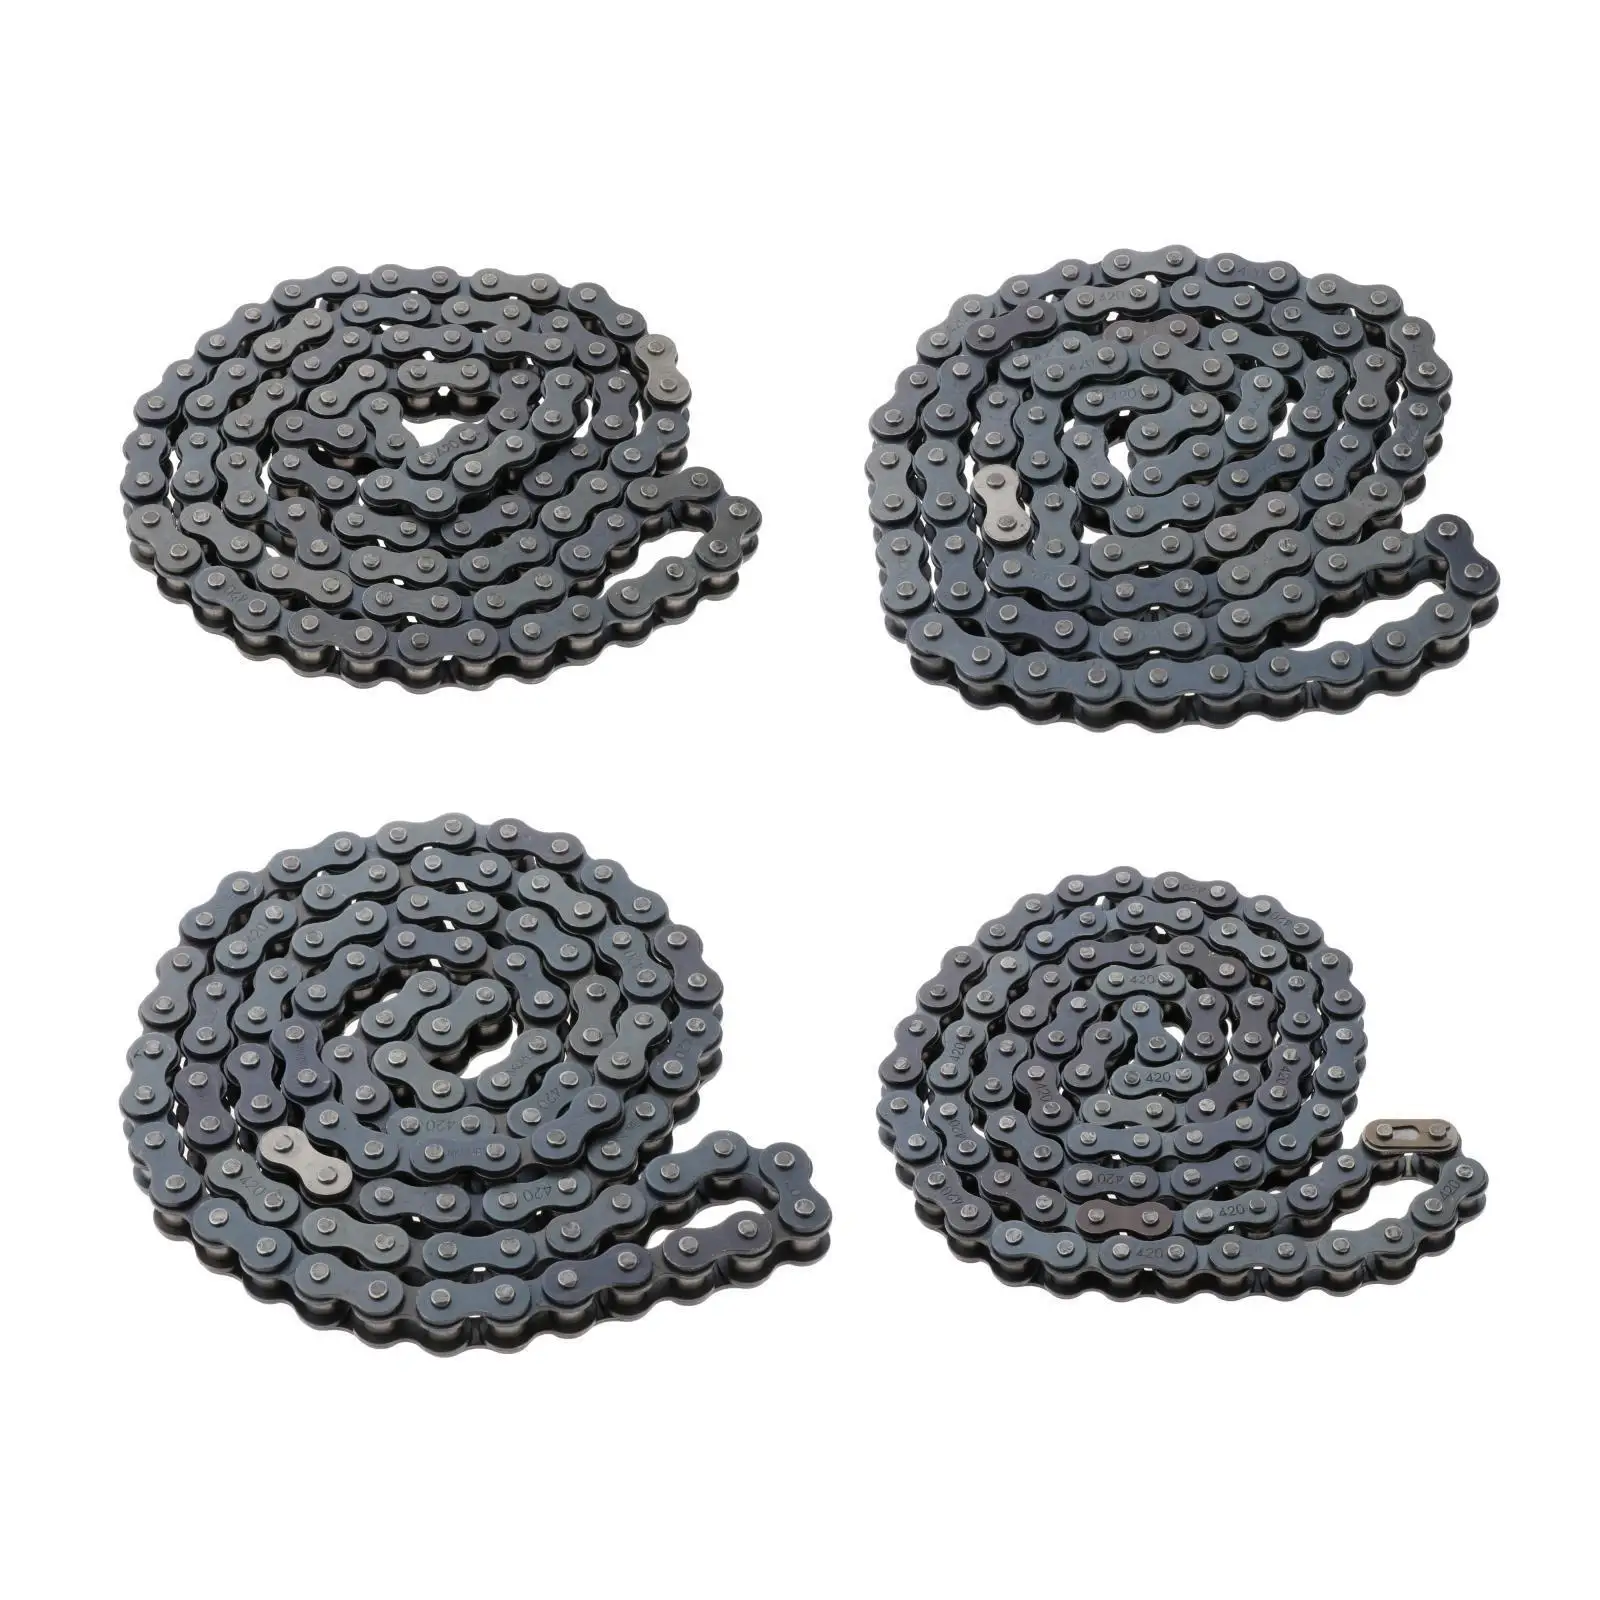 420 Motorcycle Chain 50-110Cc Drive Chain Accessories Fit for Mini Bike